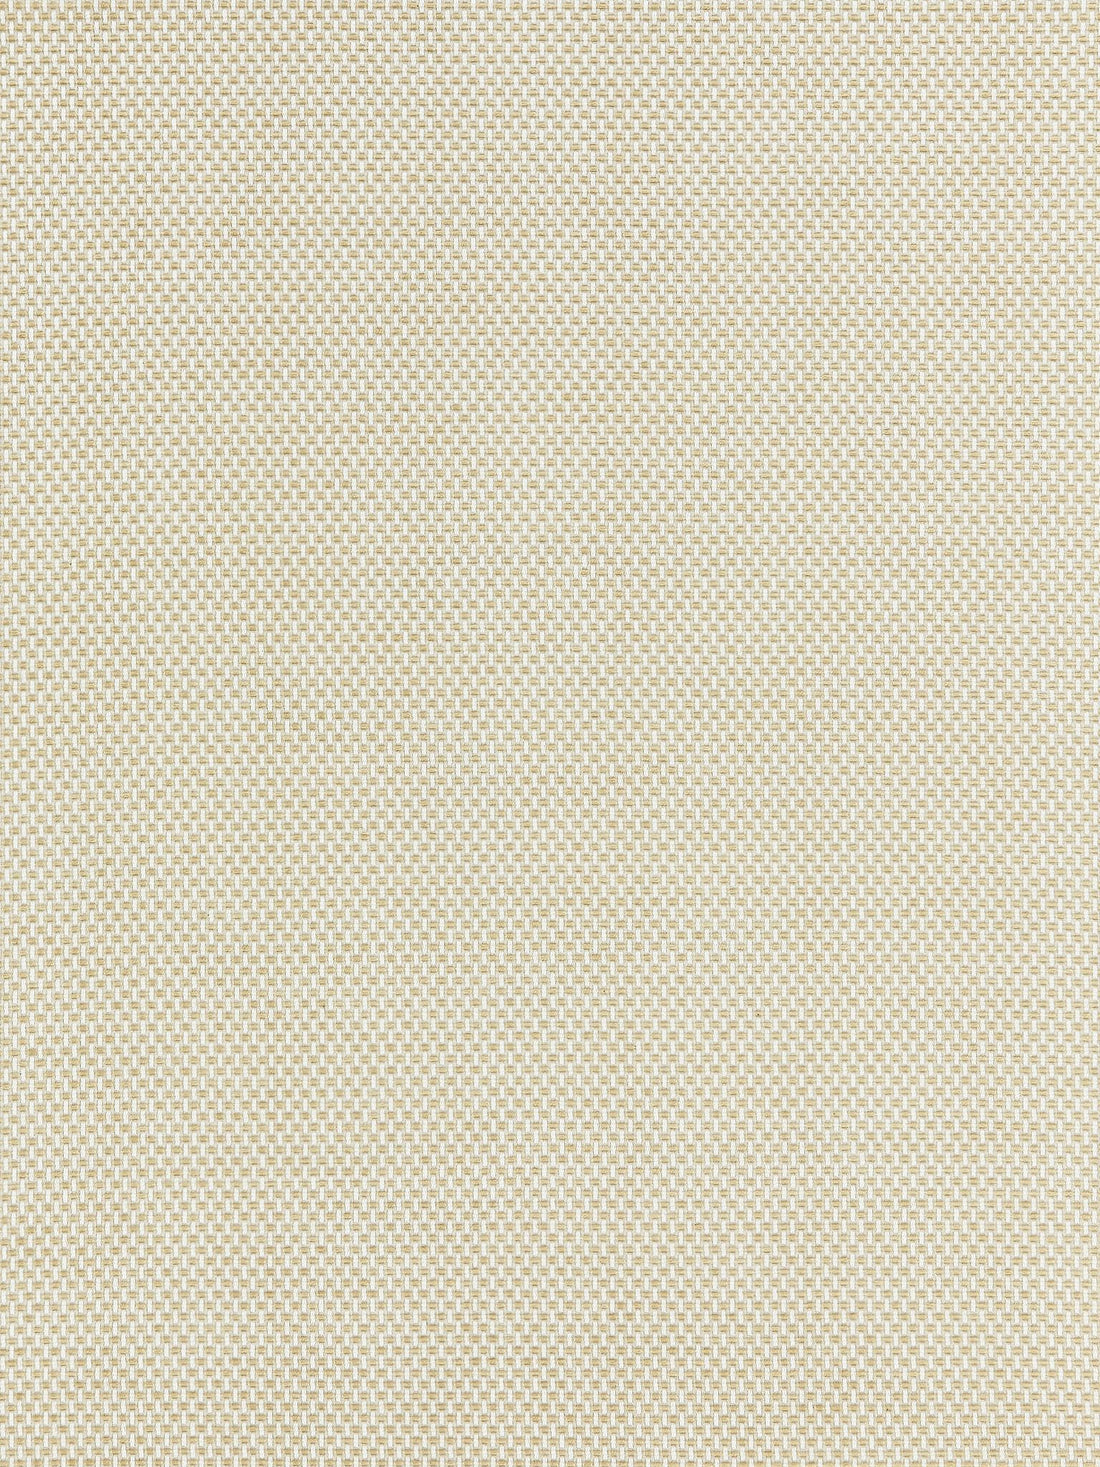 Berkshire Weave fabric in sand color - pattern number BK 0002K65115 - by Scalamandre in the Old World Weavers collection